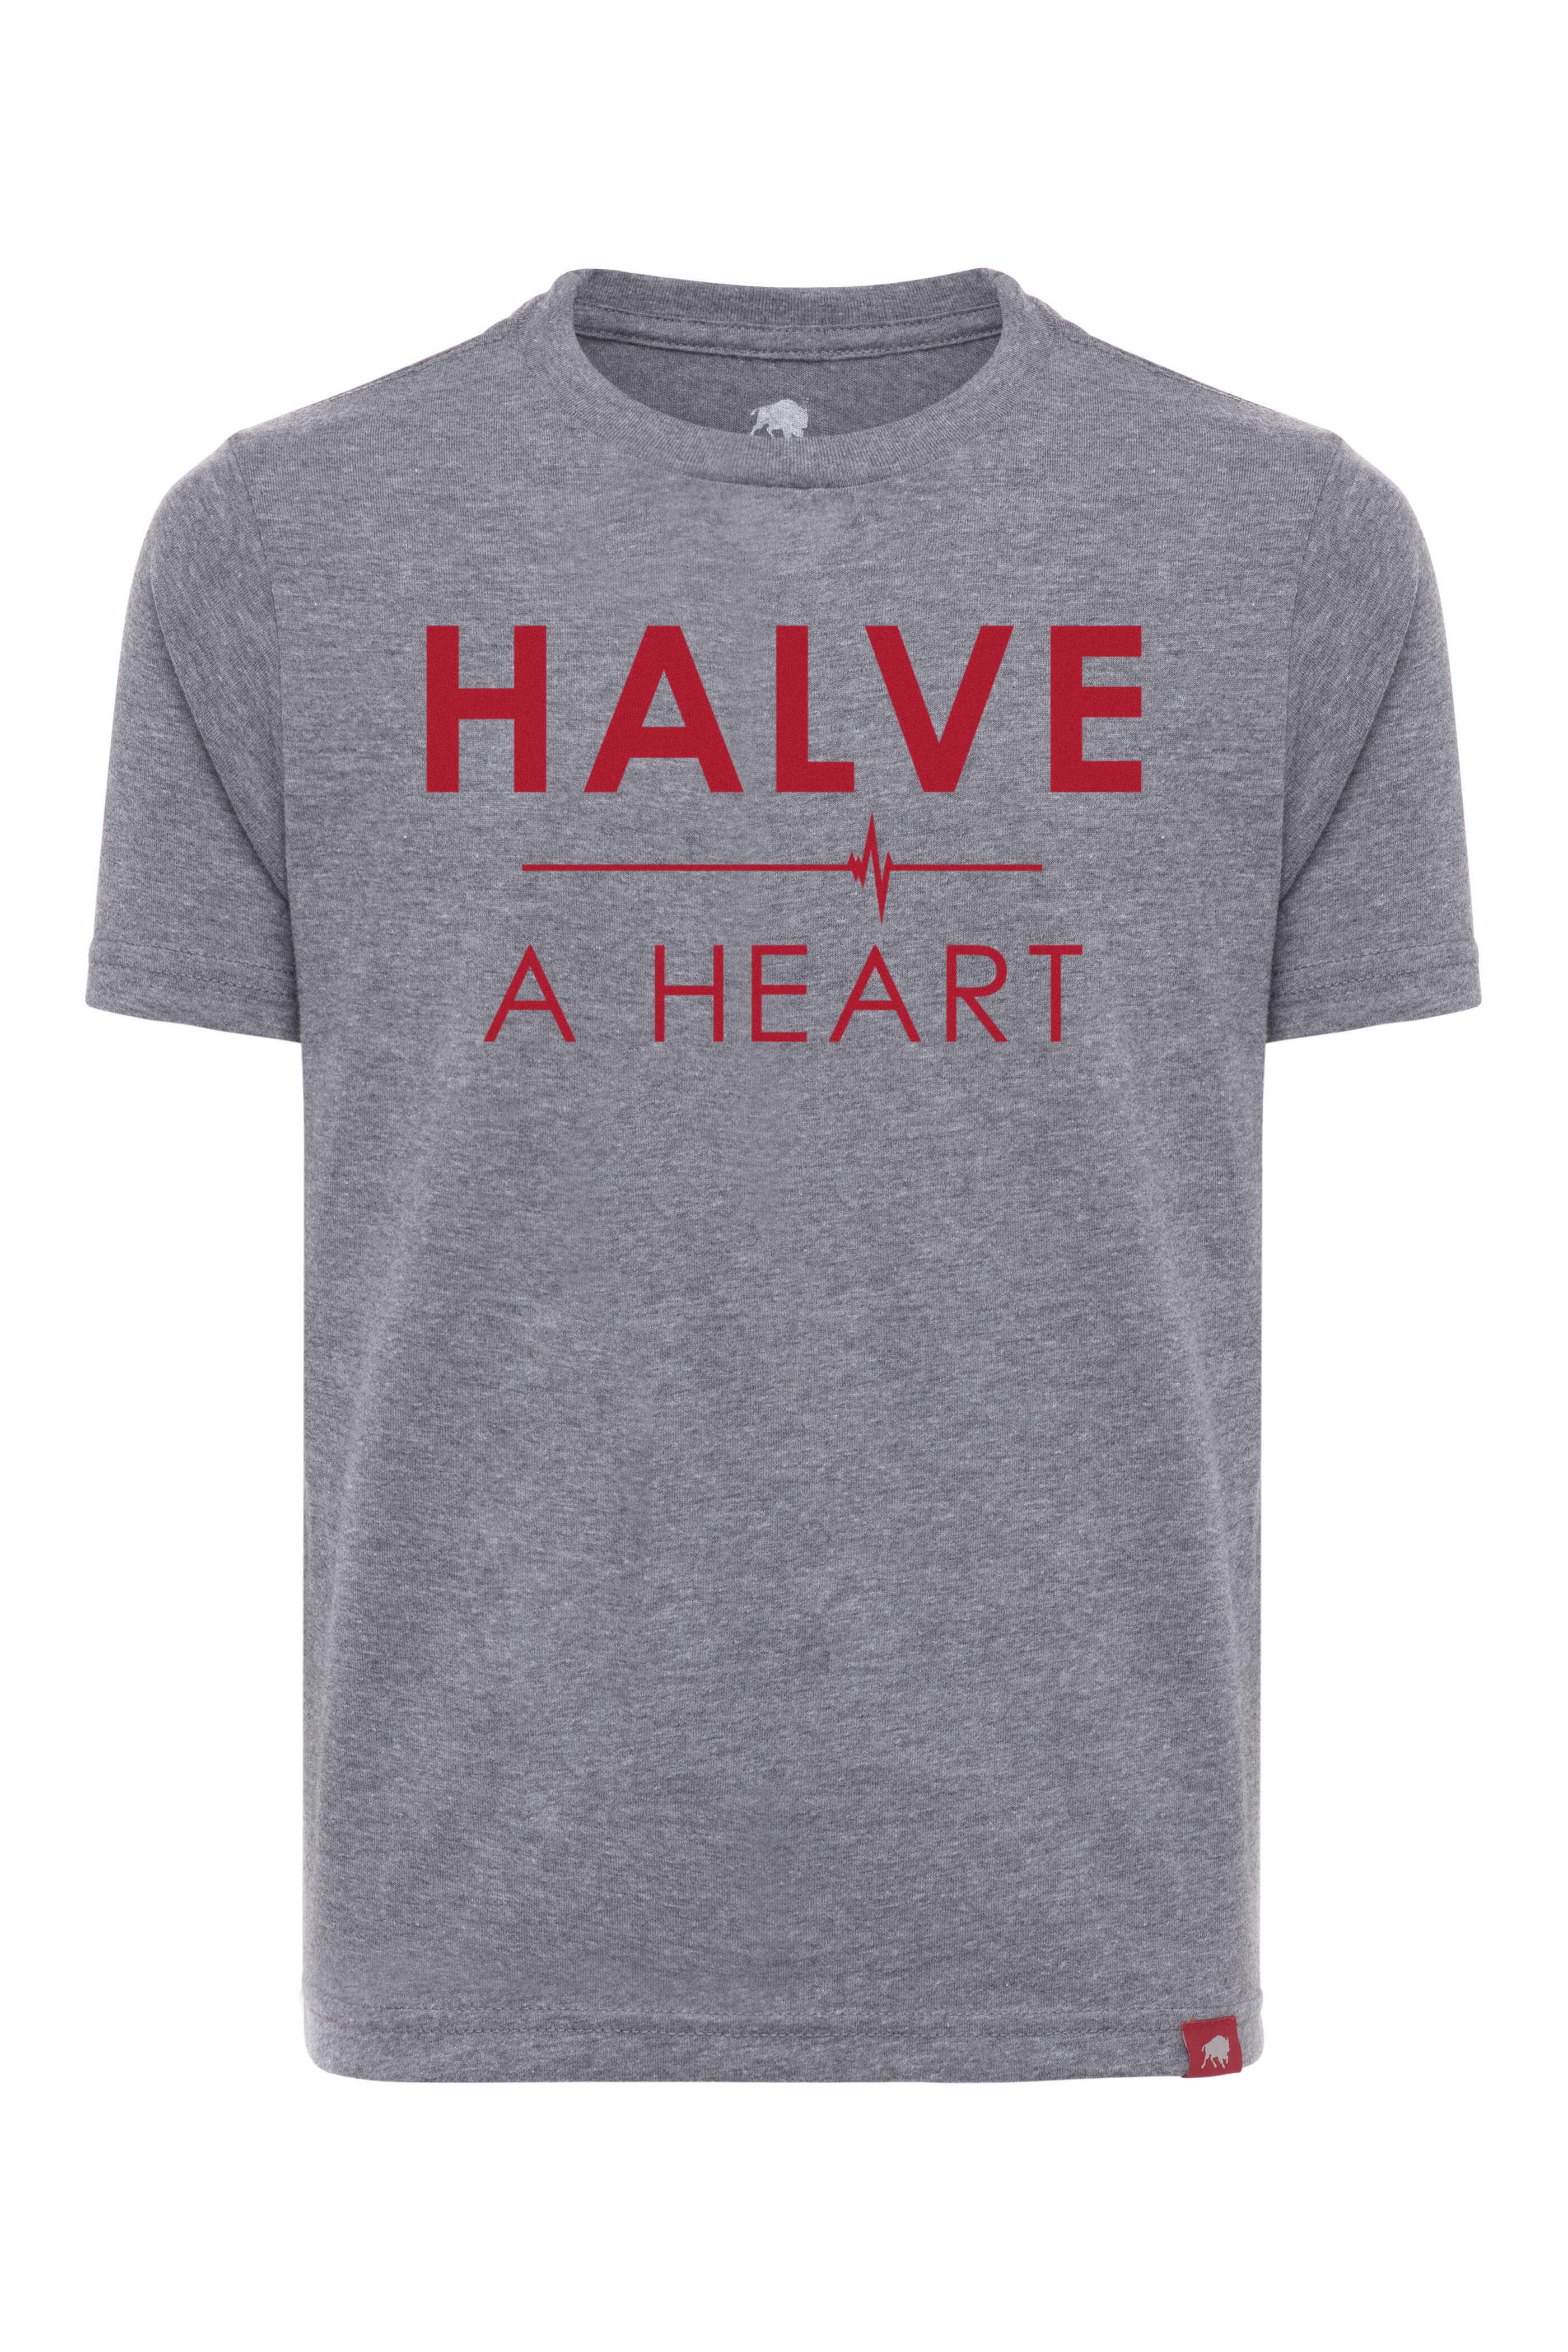 HALVE A HEART YOUTH COMFY TEE - Sportiqe Apparel 